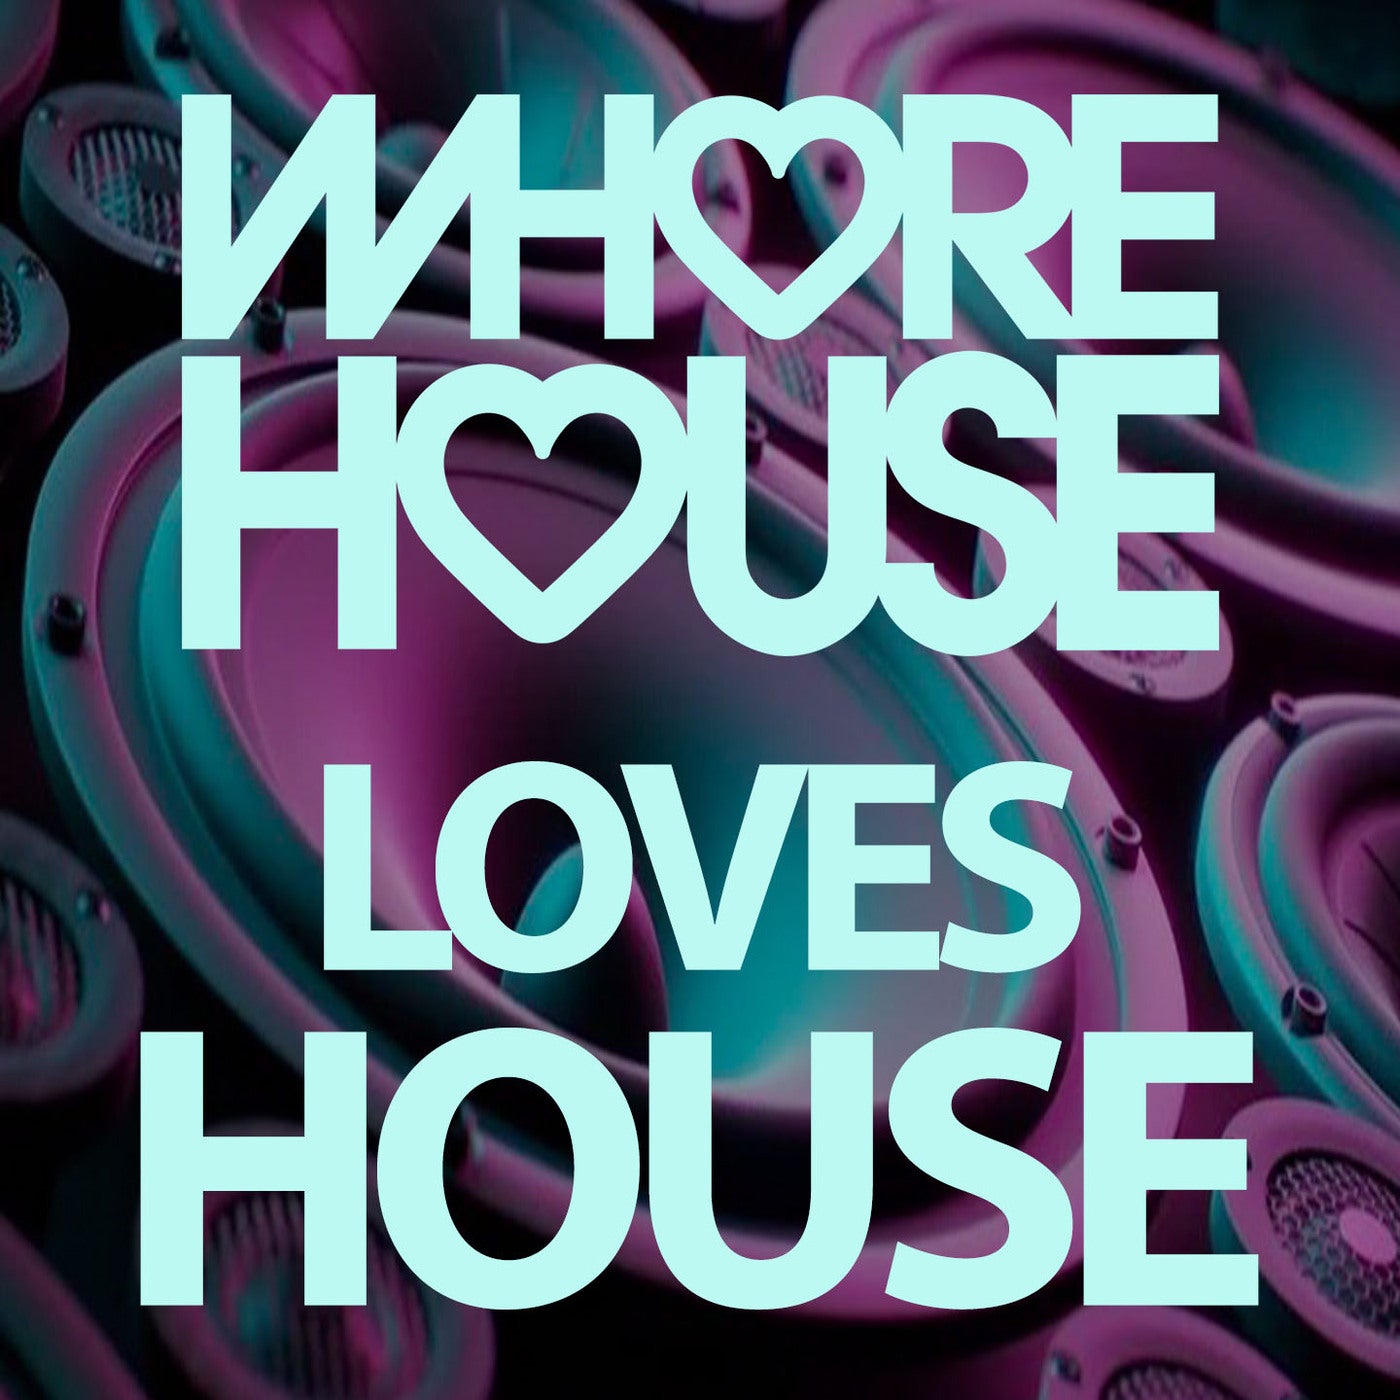 Whore House Loves House